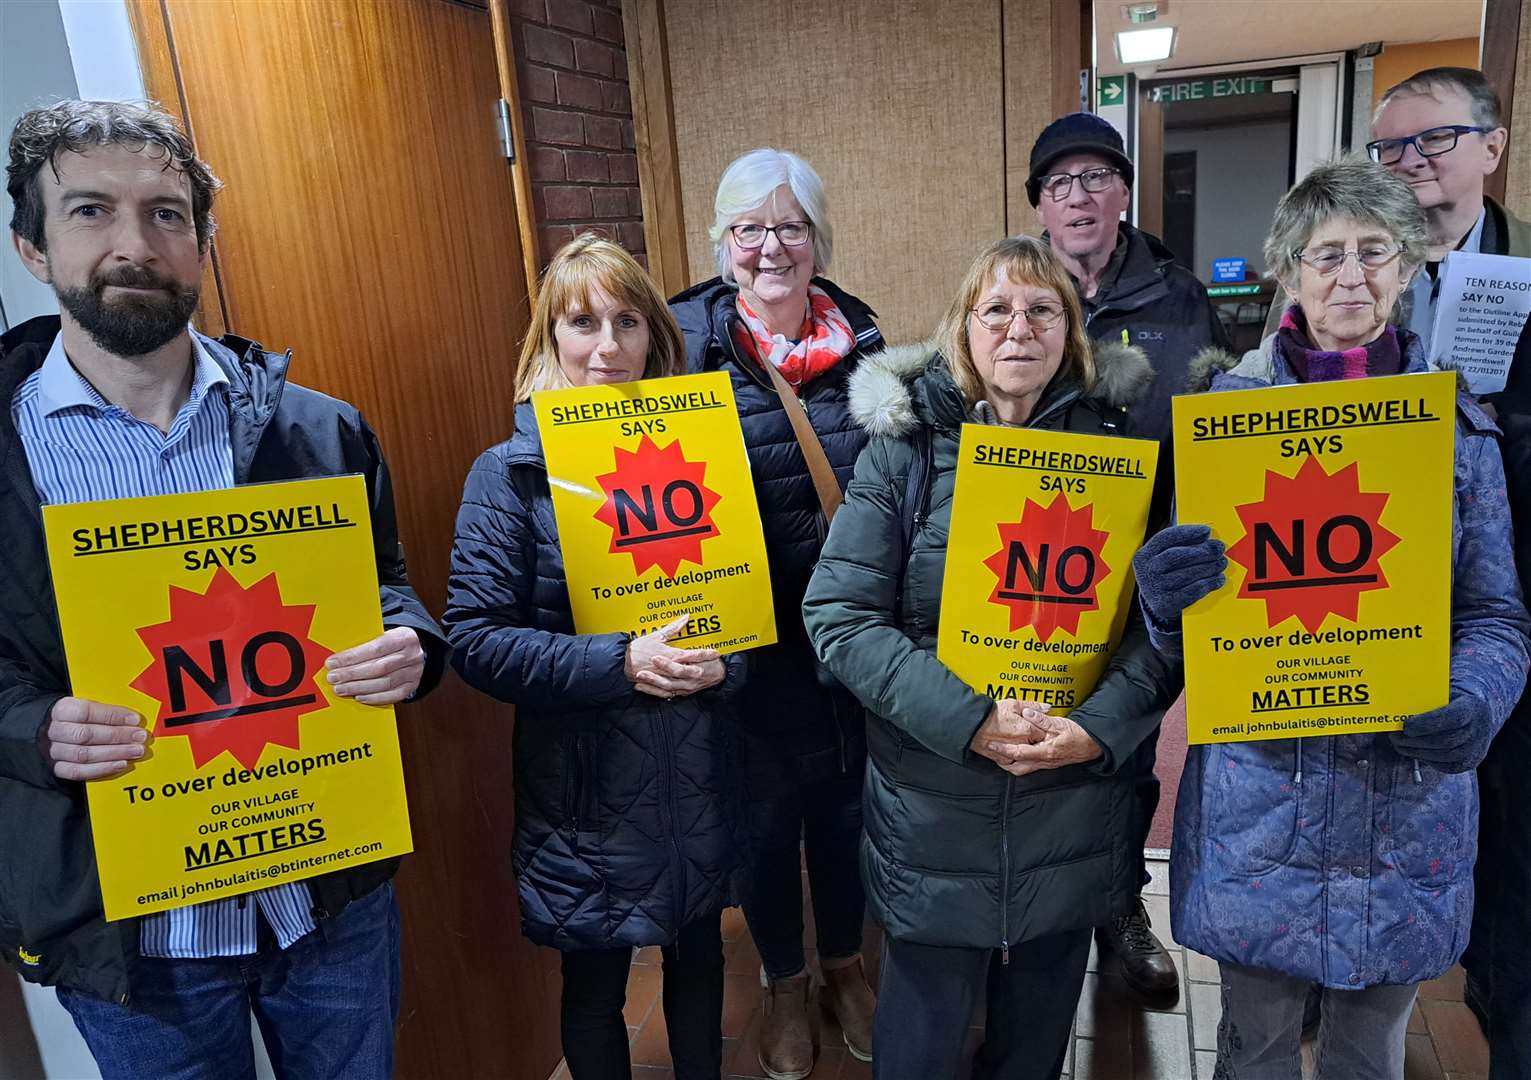 Protesters against the application for the Shepherdswell homes at Dover District Council headquarters just before the planning meeting